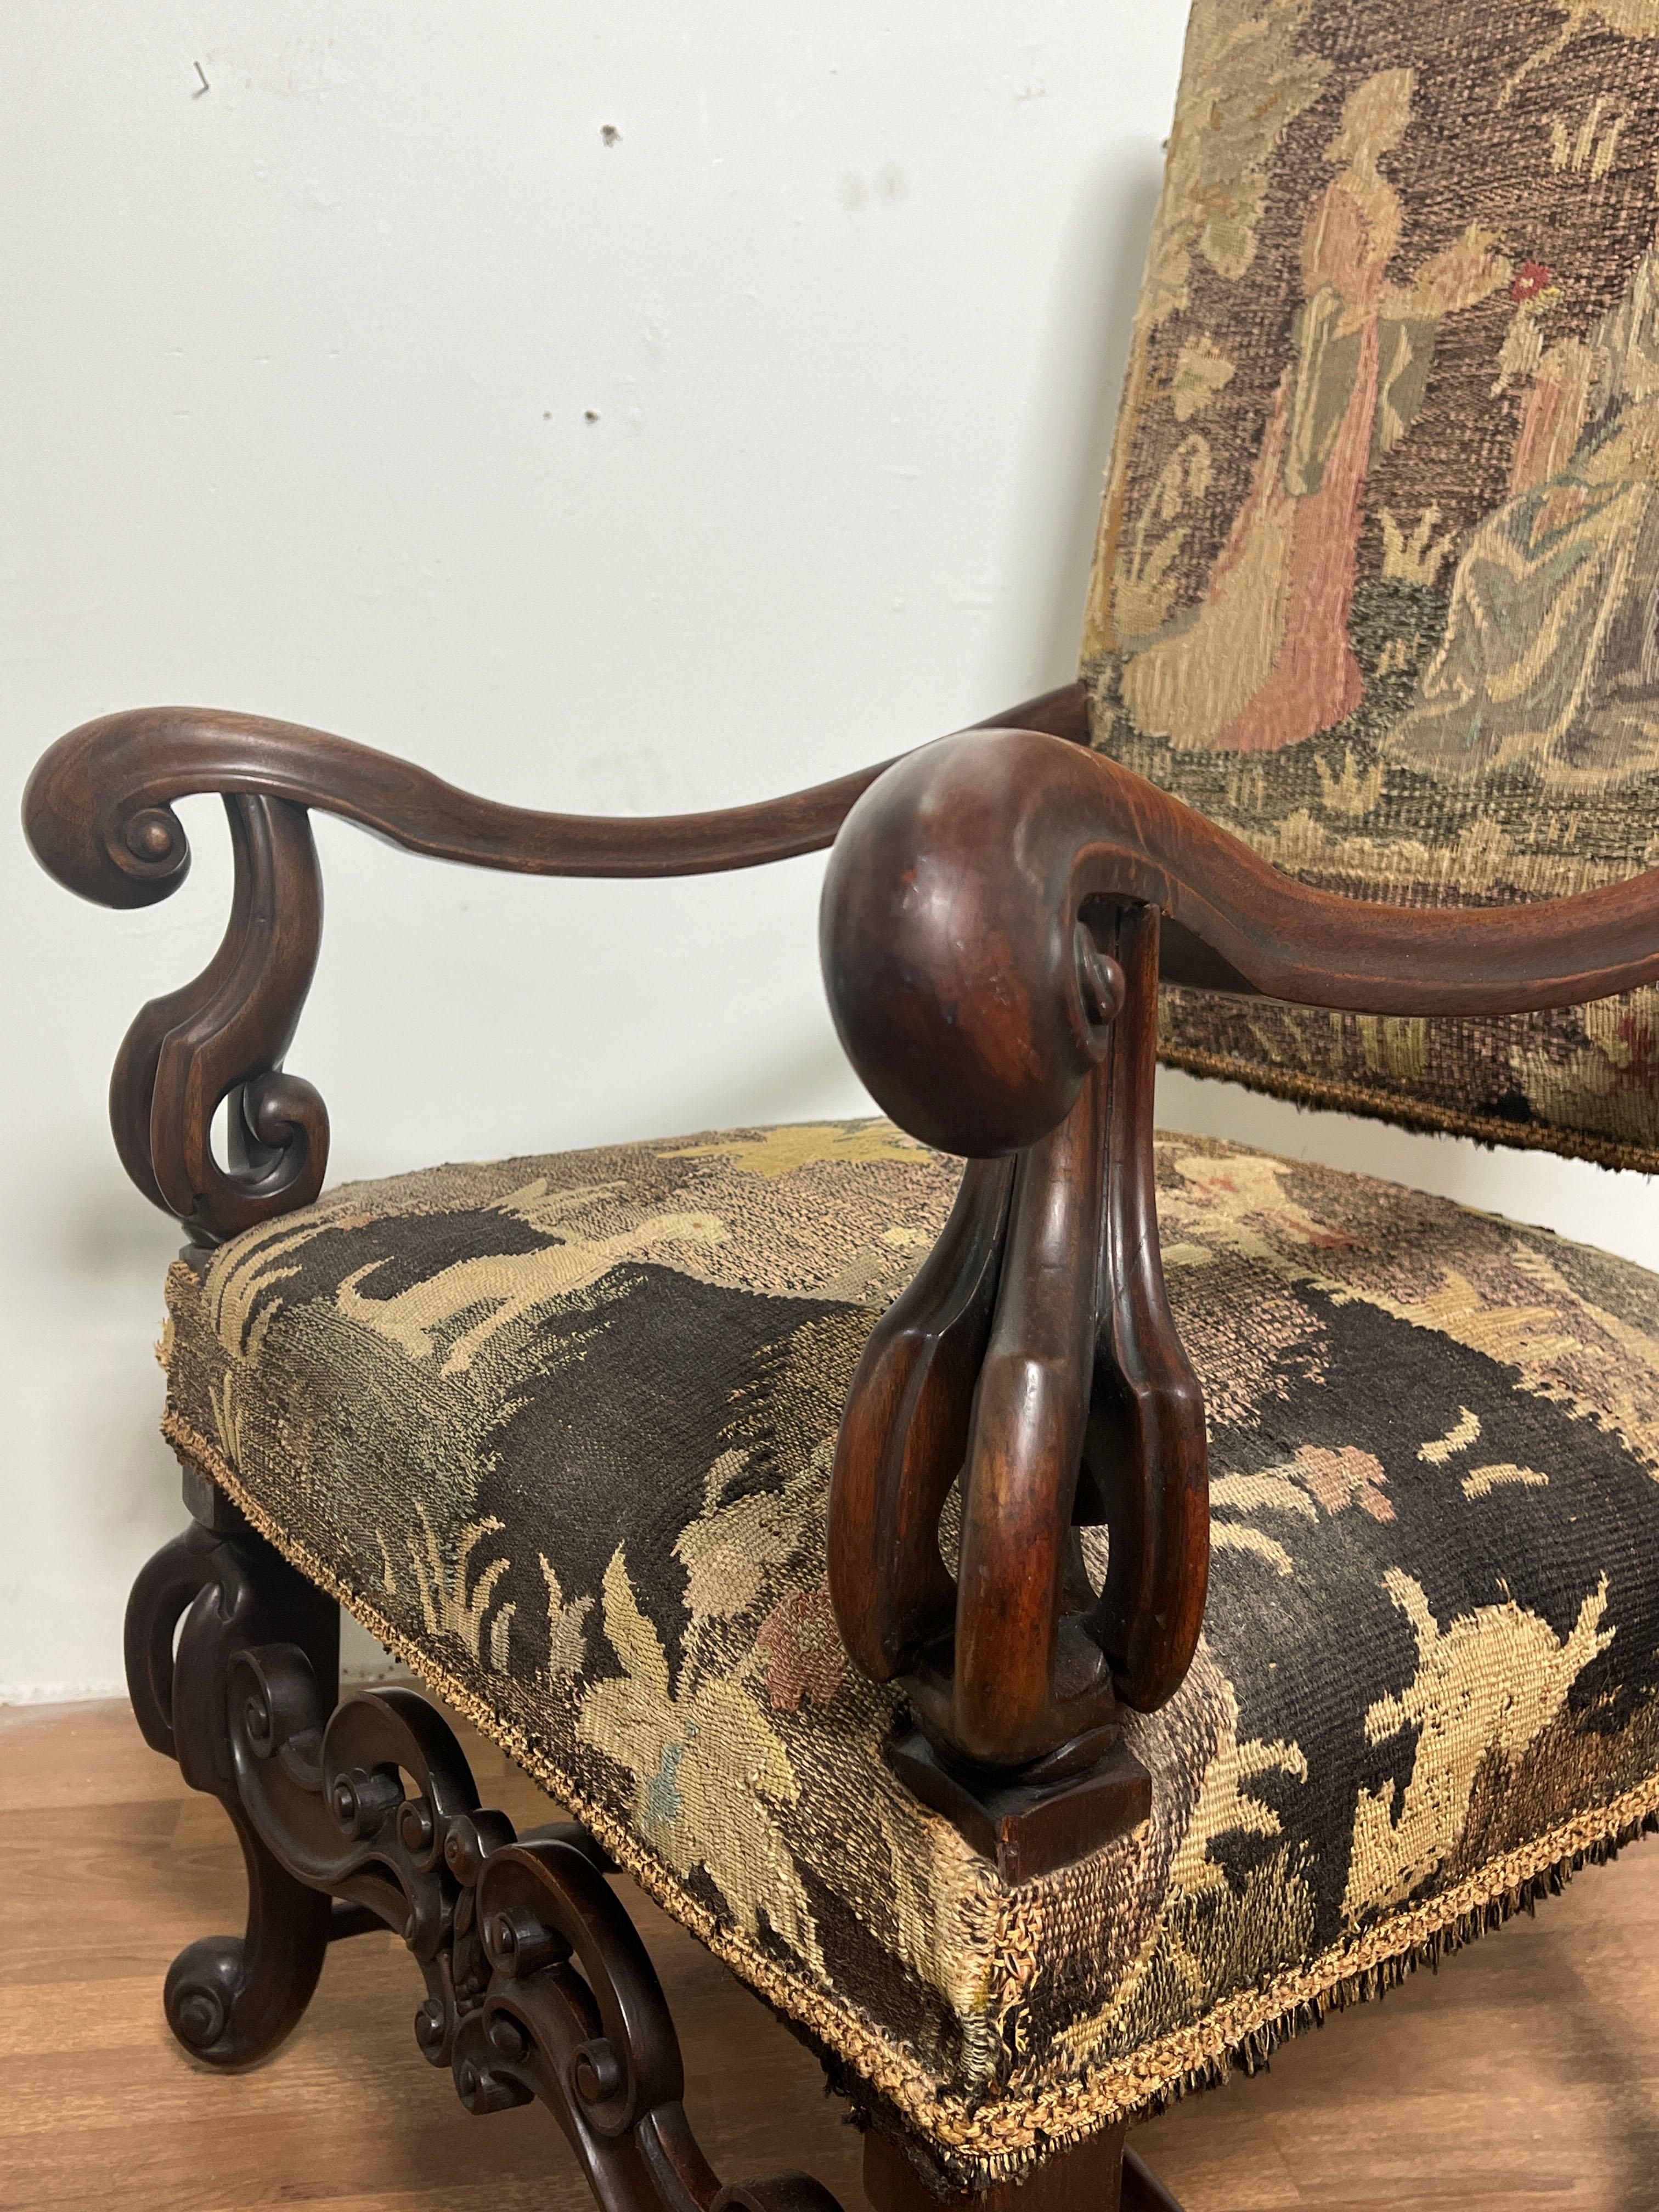 A 19th century Renaissance Revival armchair in masterfully carved walnut, upholstered in an antique Belgian tapestry.